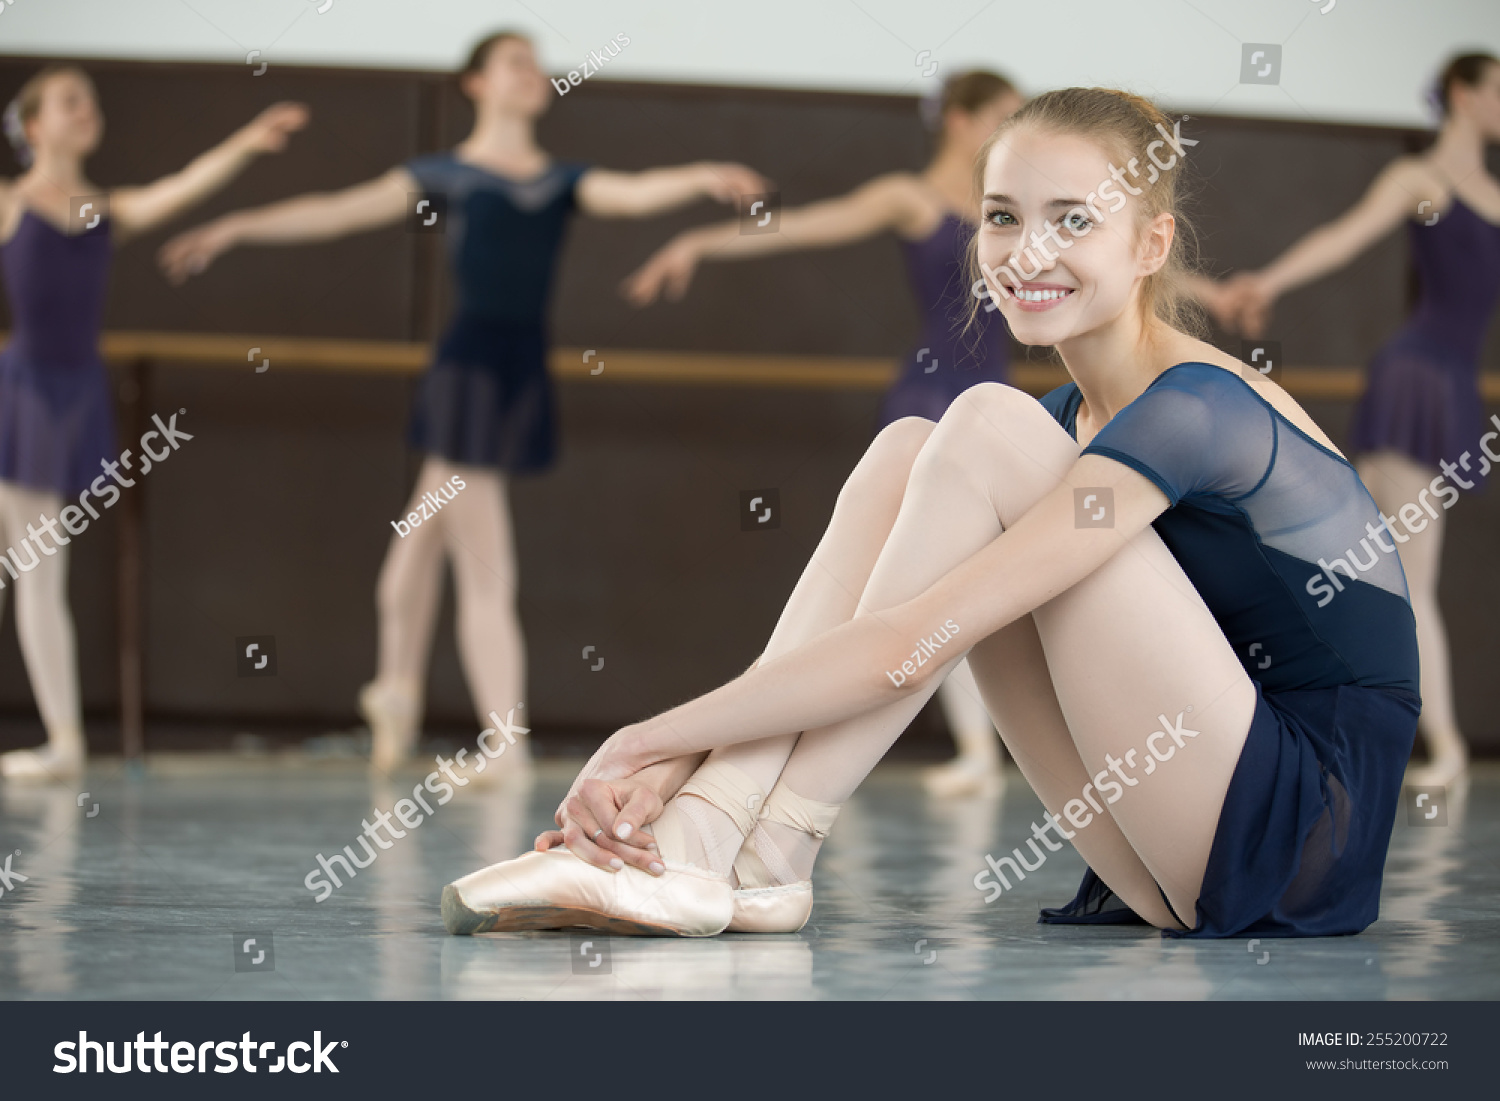 344 Middle school dance Stock Photos, Images & Photography | Shutterstock